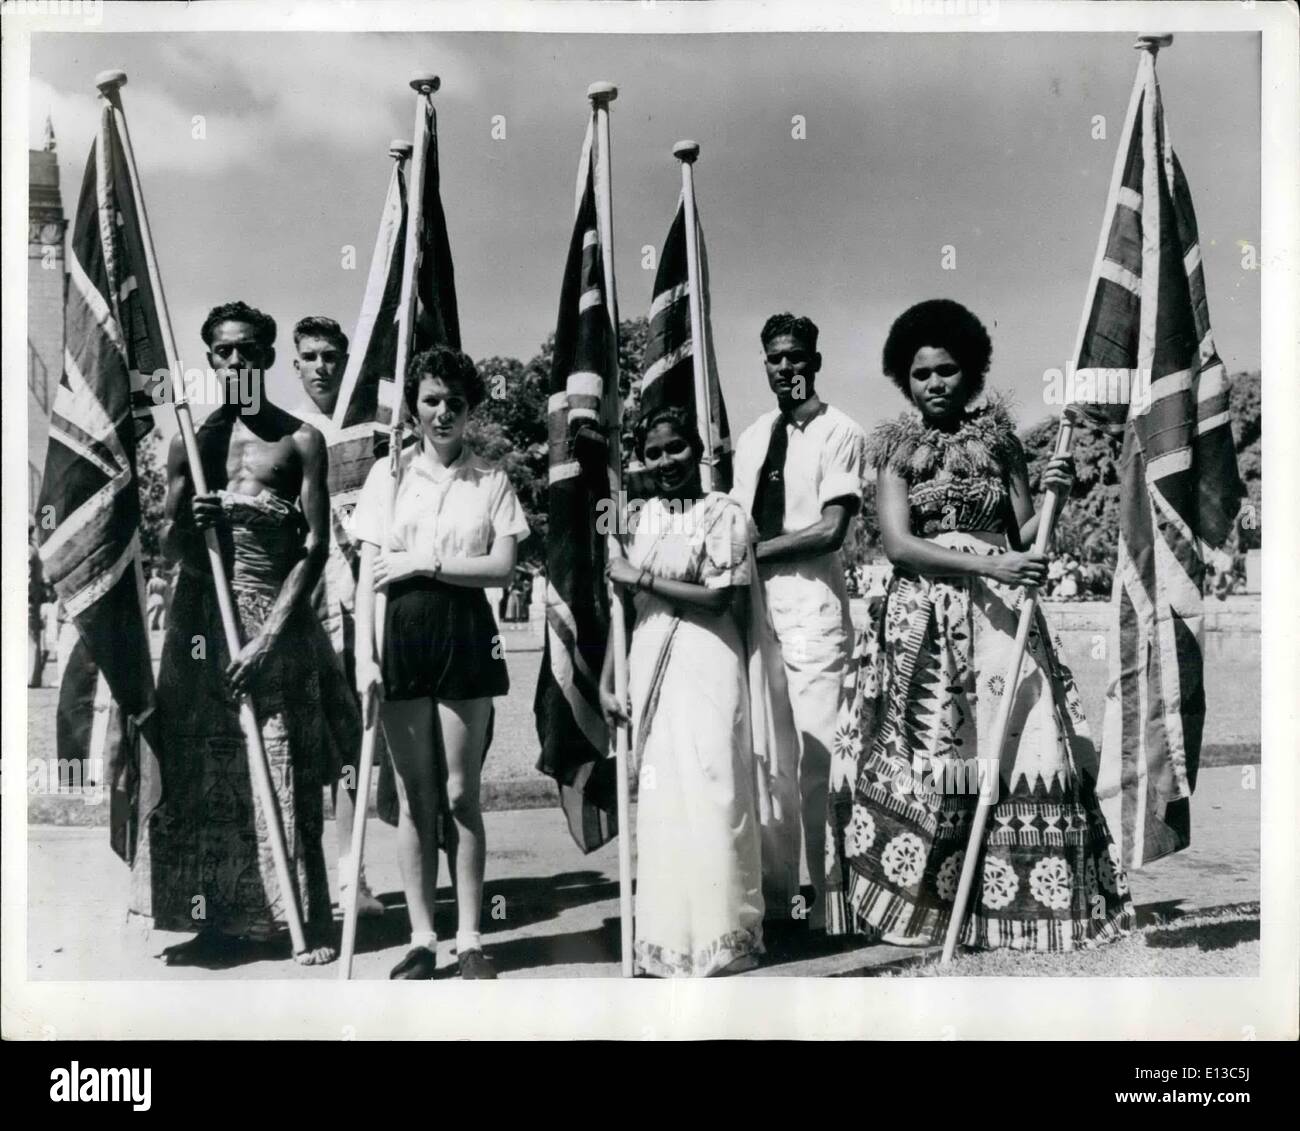 Feb. 29, 2012 - Fiji celebrates seventy five years of British rule.: The 75th anniversary of Fiji's cession to Britain was celebrated on October 10th. 1949, and was marked by military parades, a sports meeting to select athletes to compete in the Empire Games to be held at Auckland, N.Z. in Feb. 1950, and an exhibition to show the remarkable economic and social progress of the colony during the seventy-five years under British rule. Stock Photo